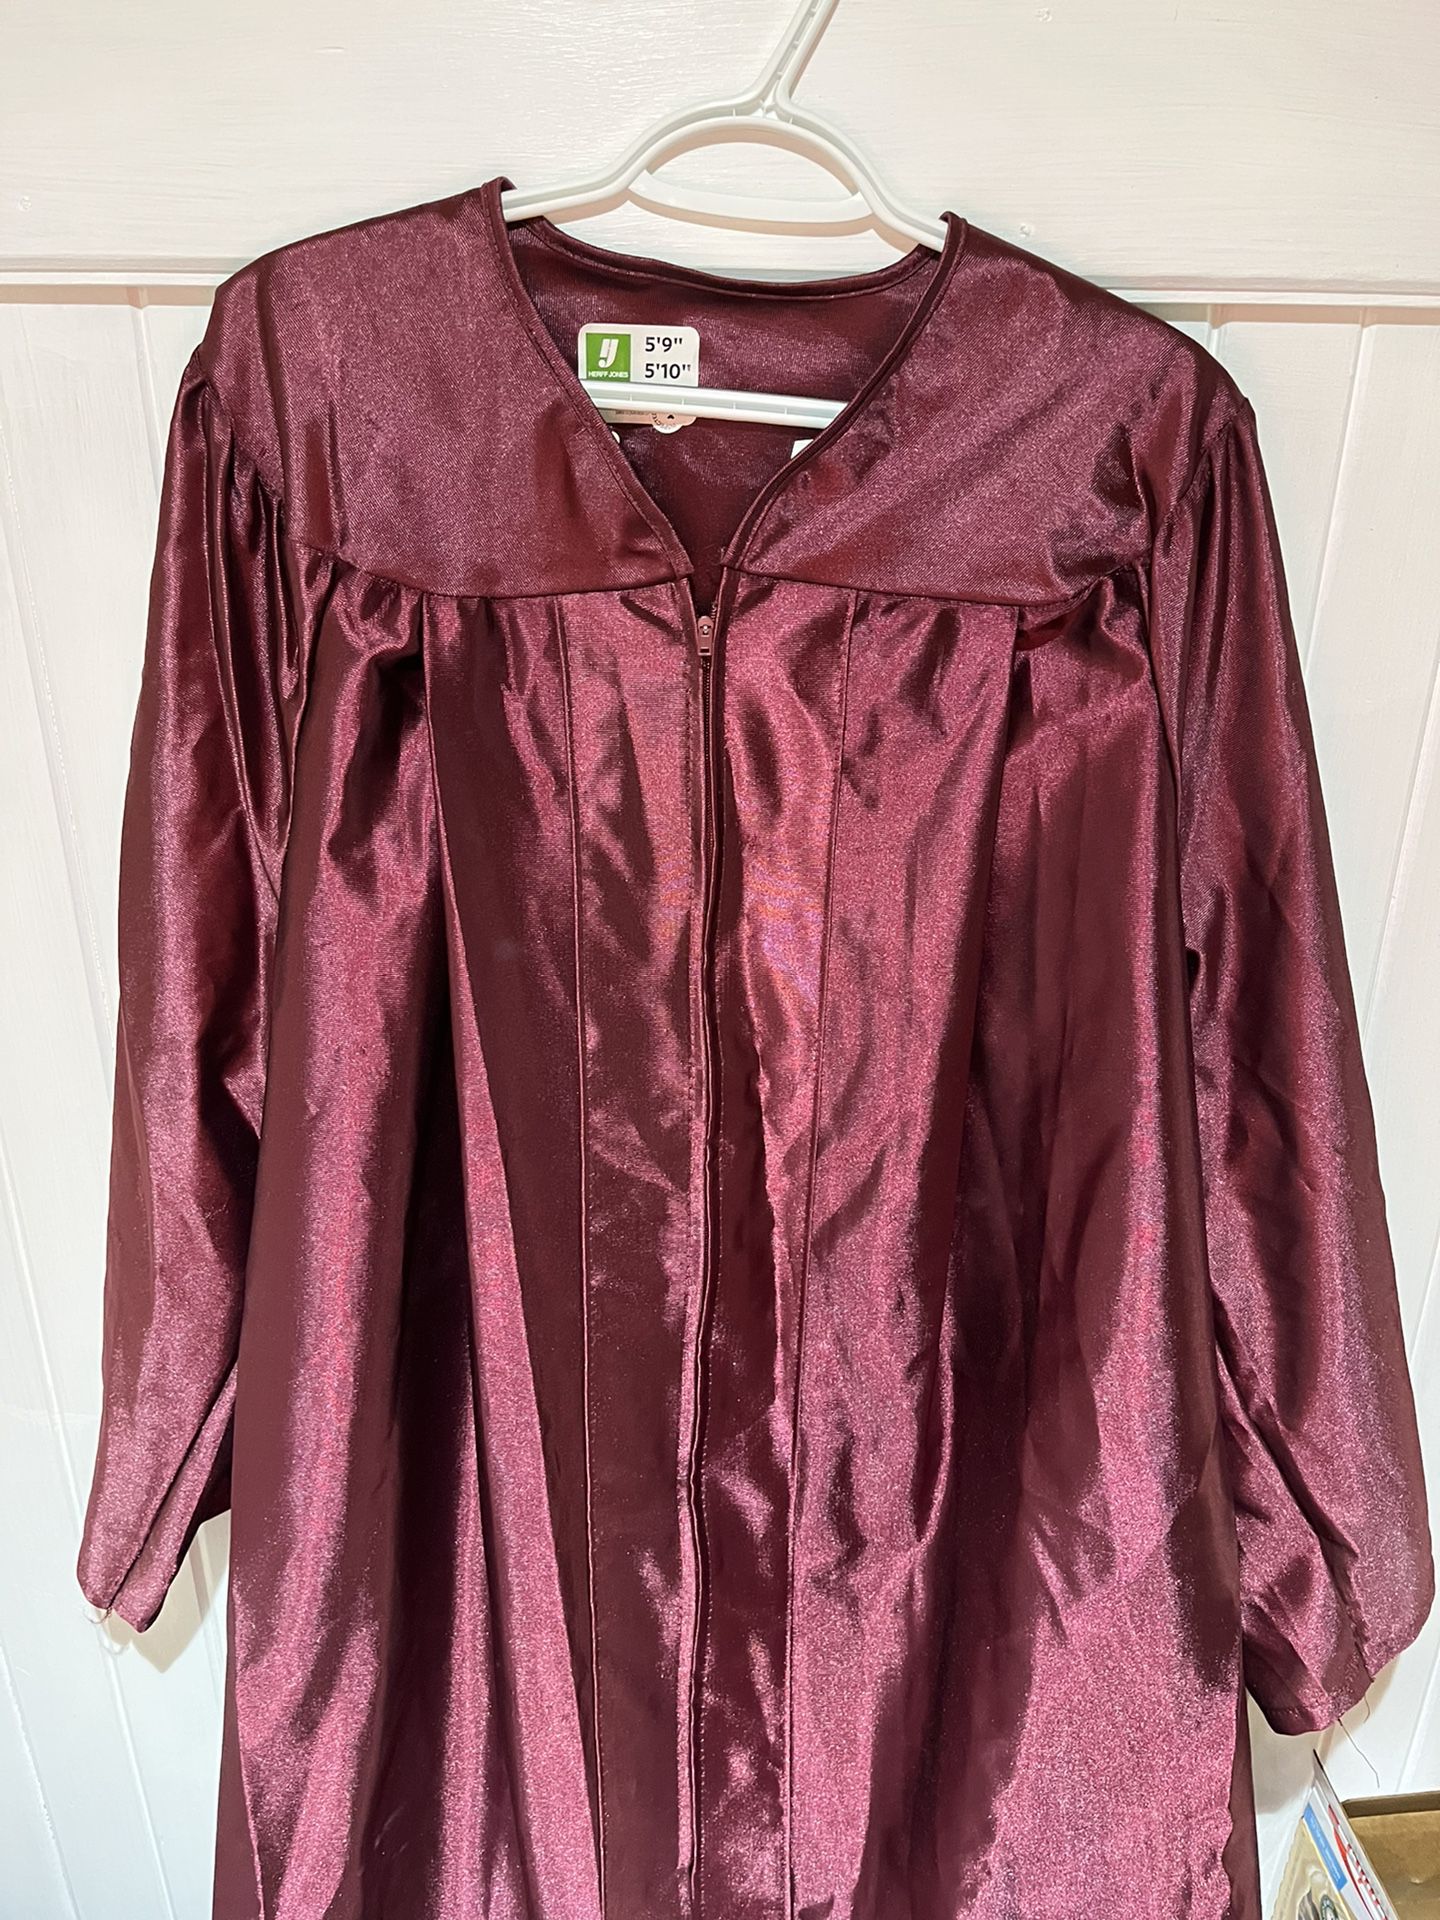 Countryside HS Graduation Gown REDUCED